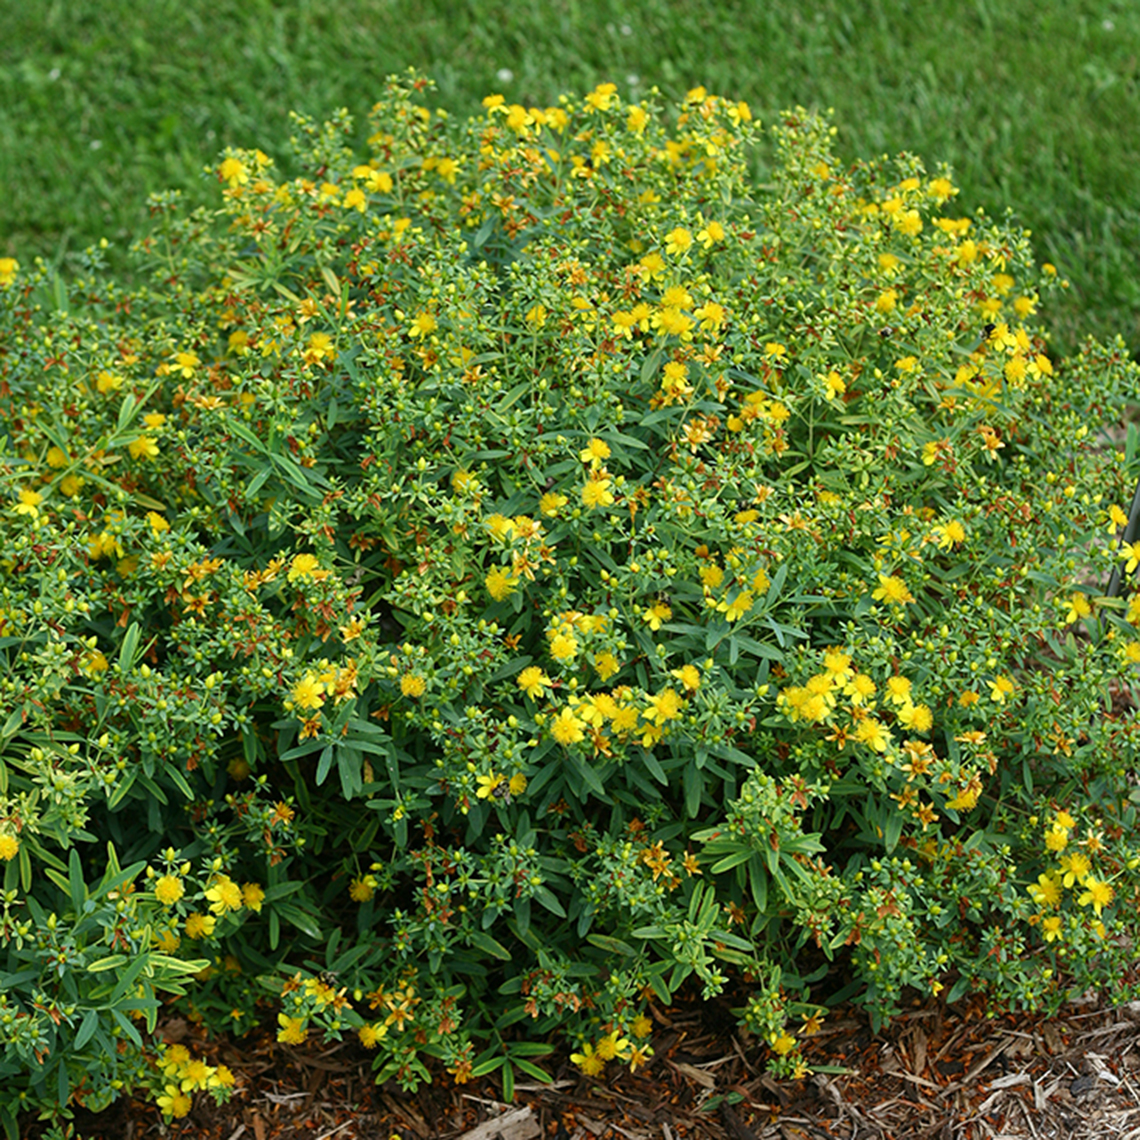 A specimen of Blues Festival hypericum showing its habit and yellow blooms